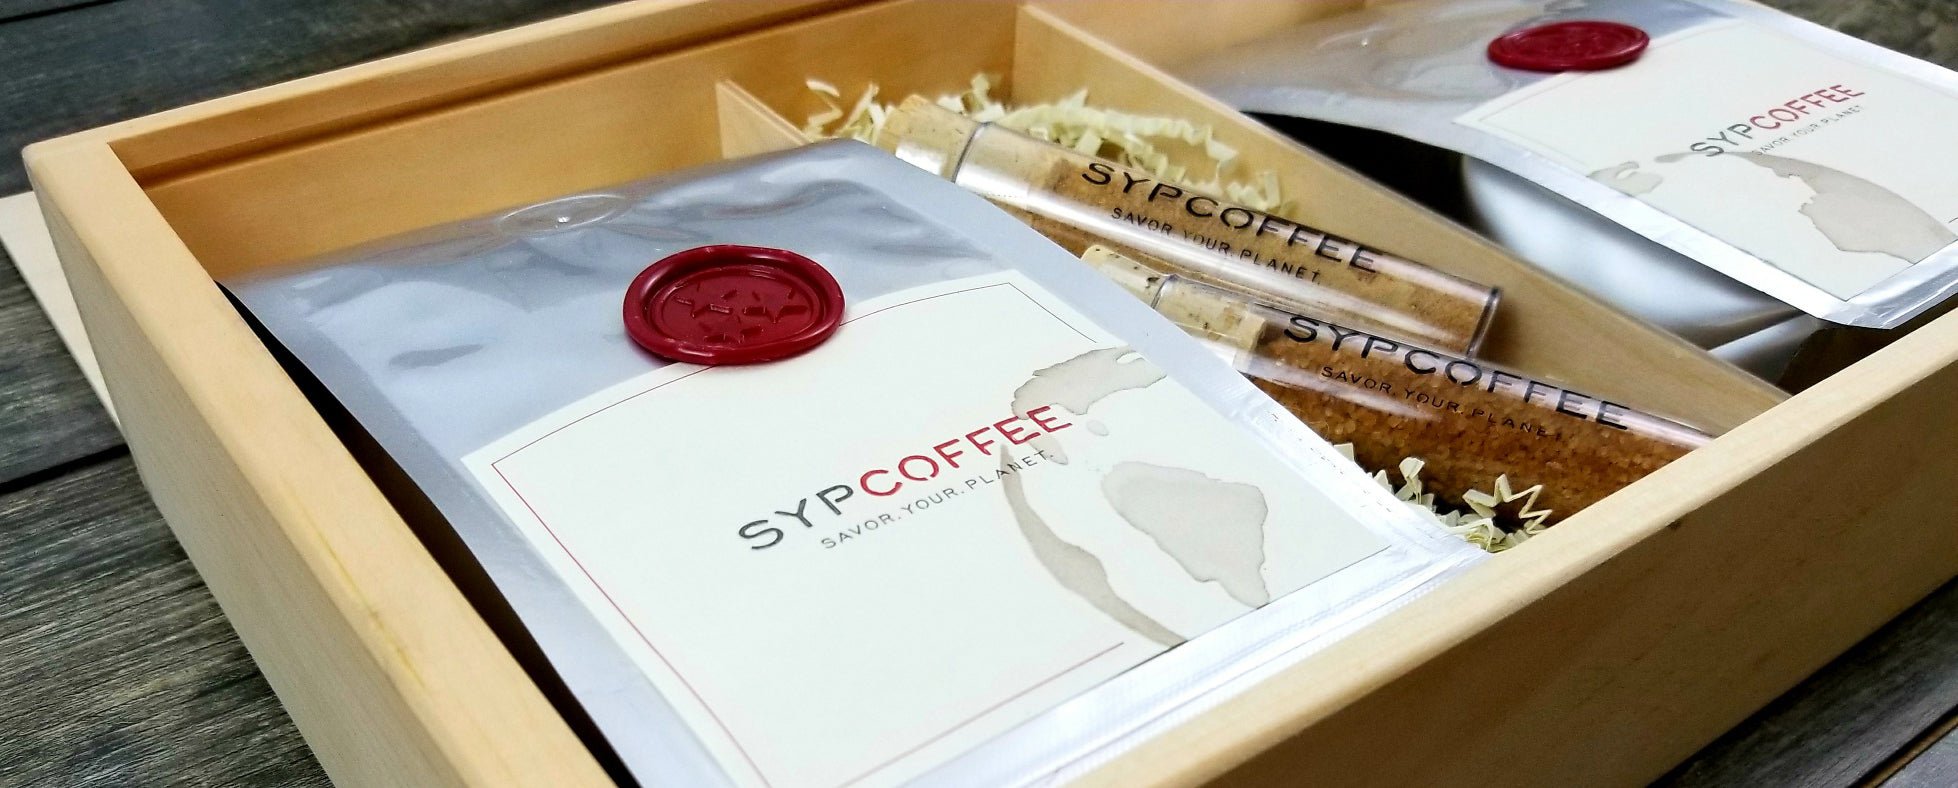 Image of coffee gift crate from SYPCOFFEE.